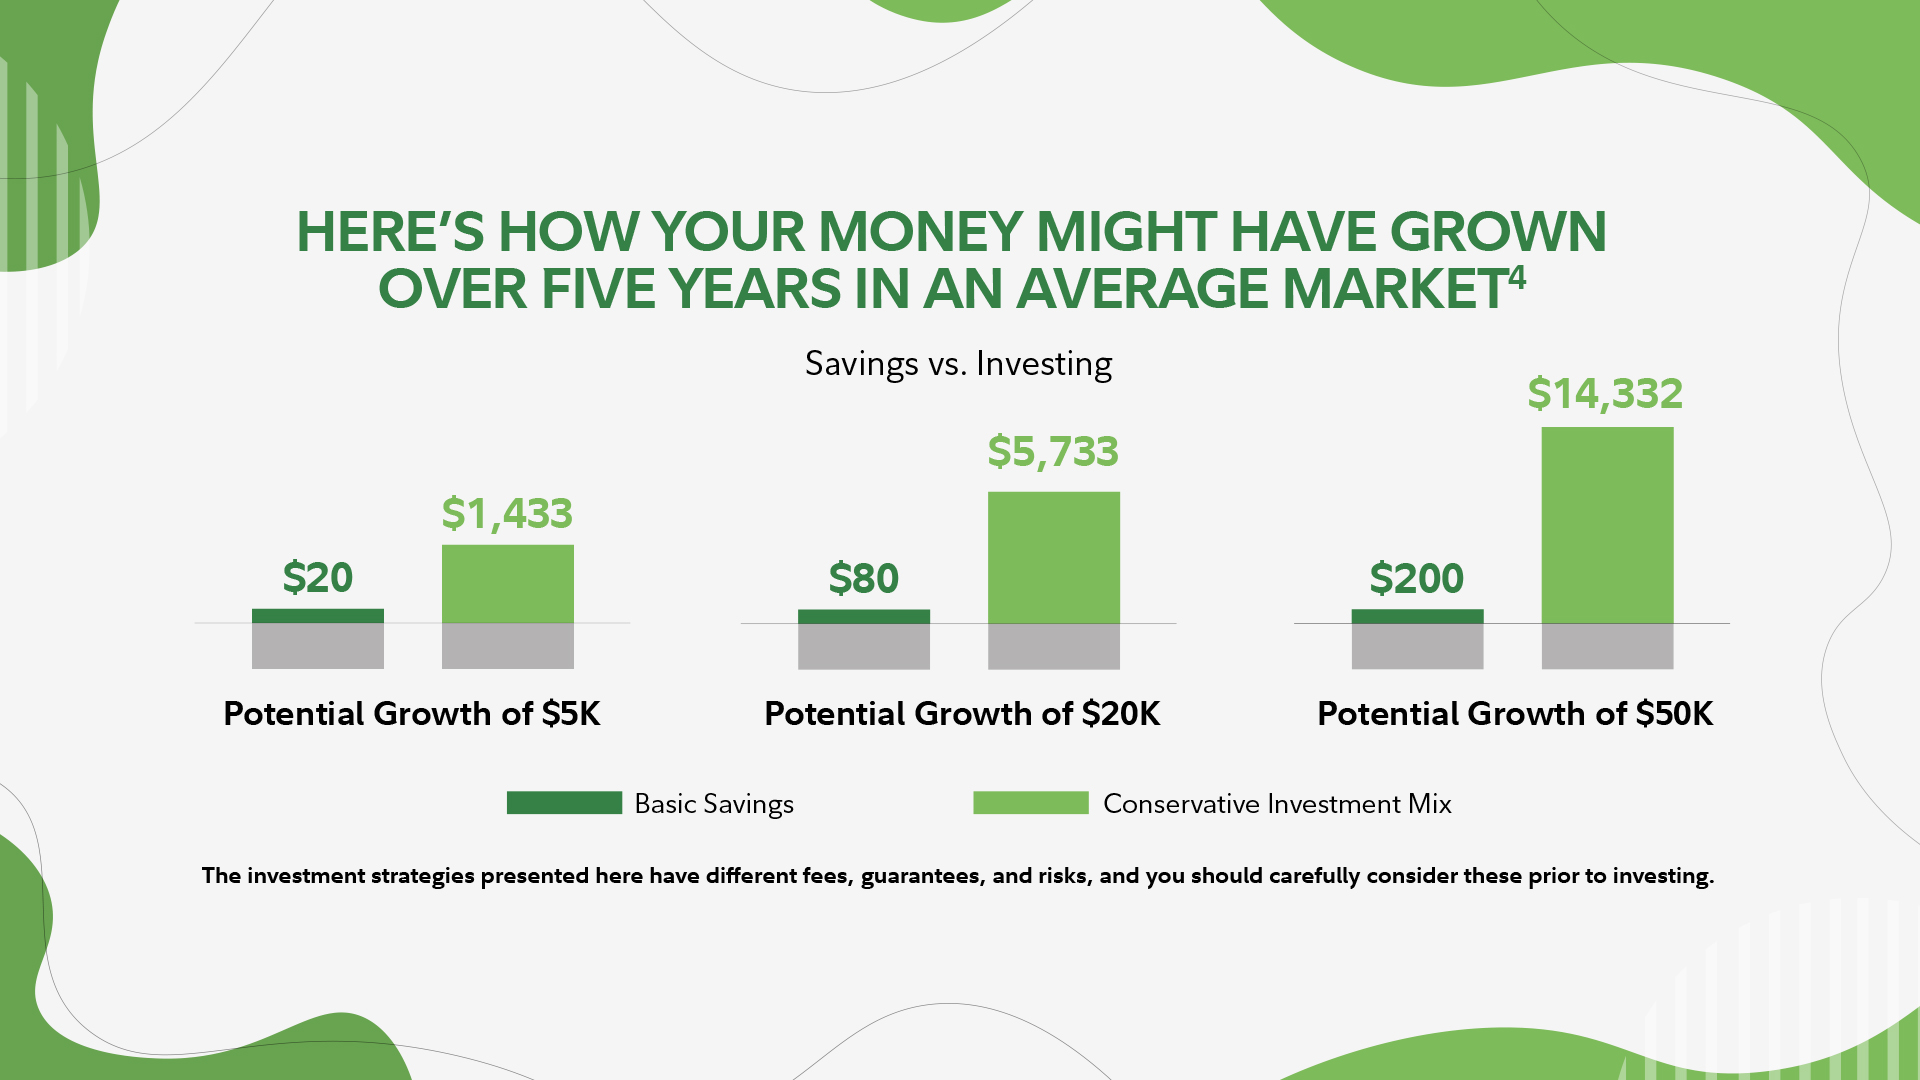 Chart showing how three different amounts of money might have grown over five years in an average market when in a basic savings account versus a conservative investment mix.